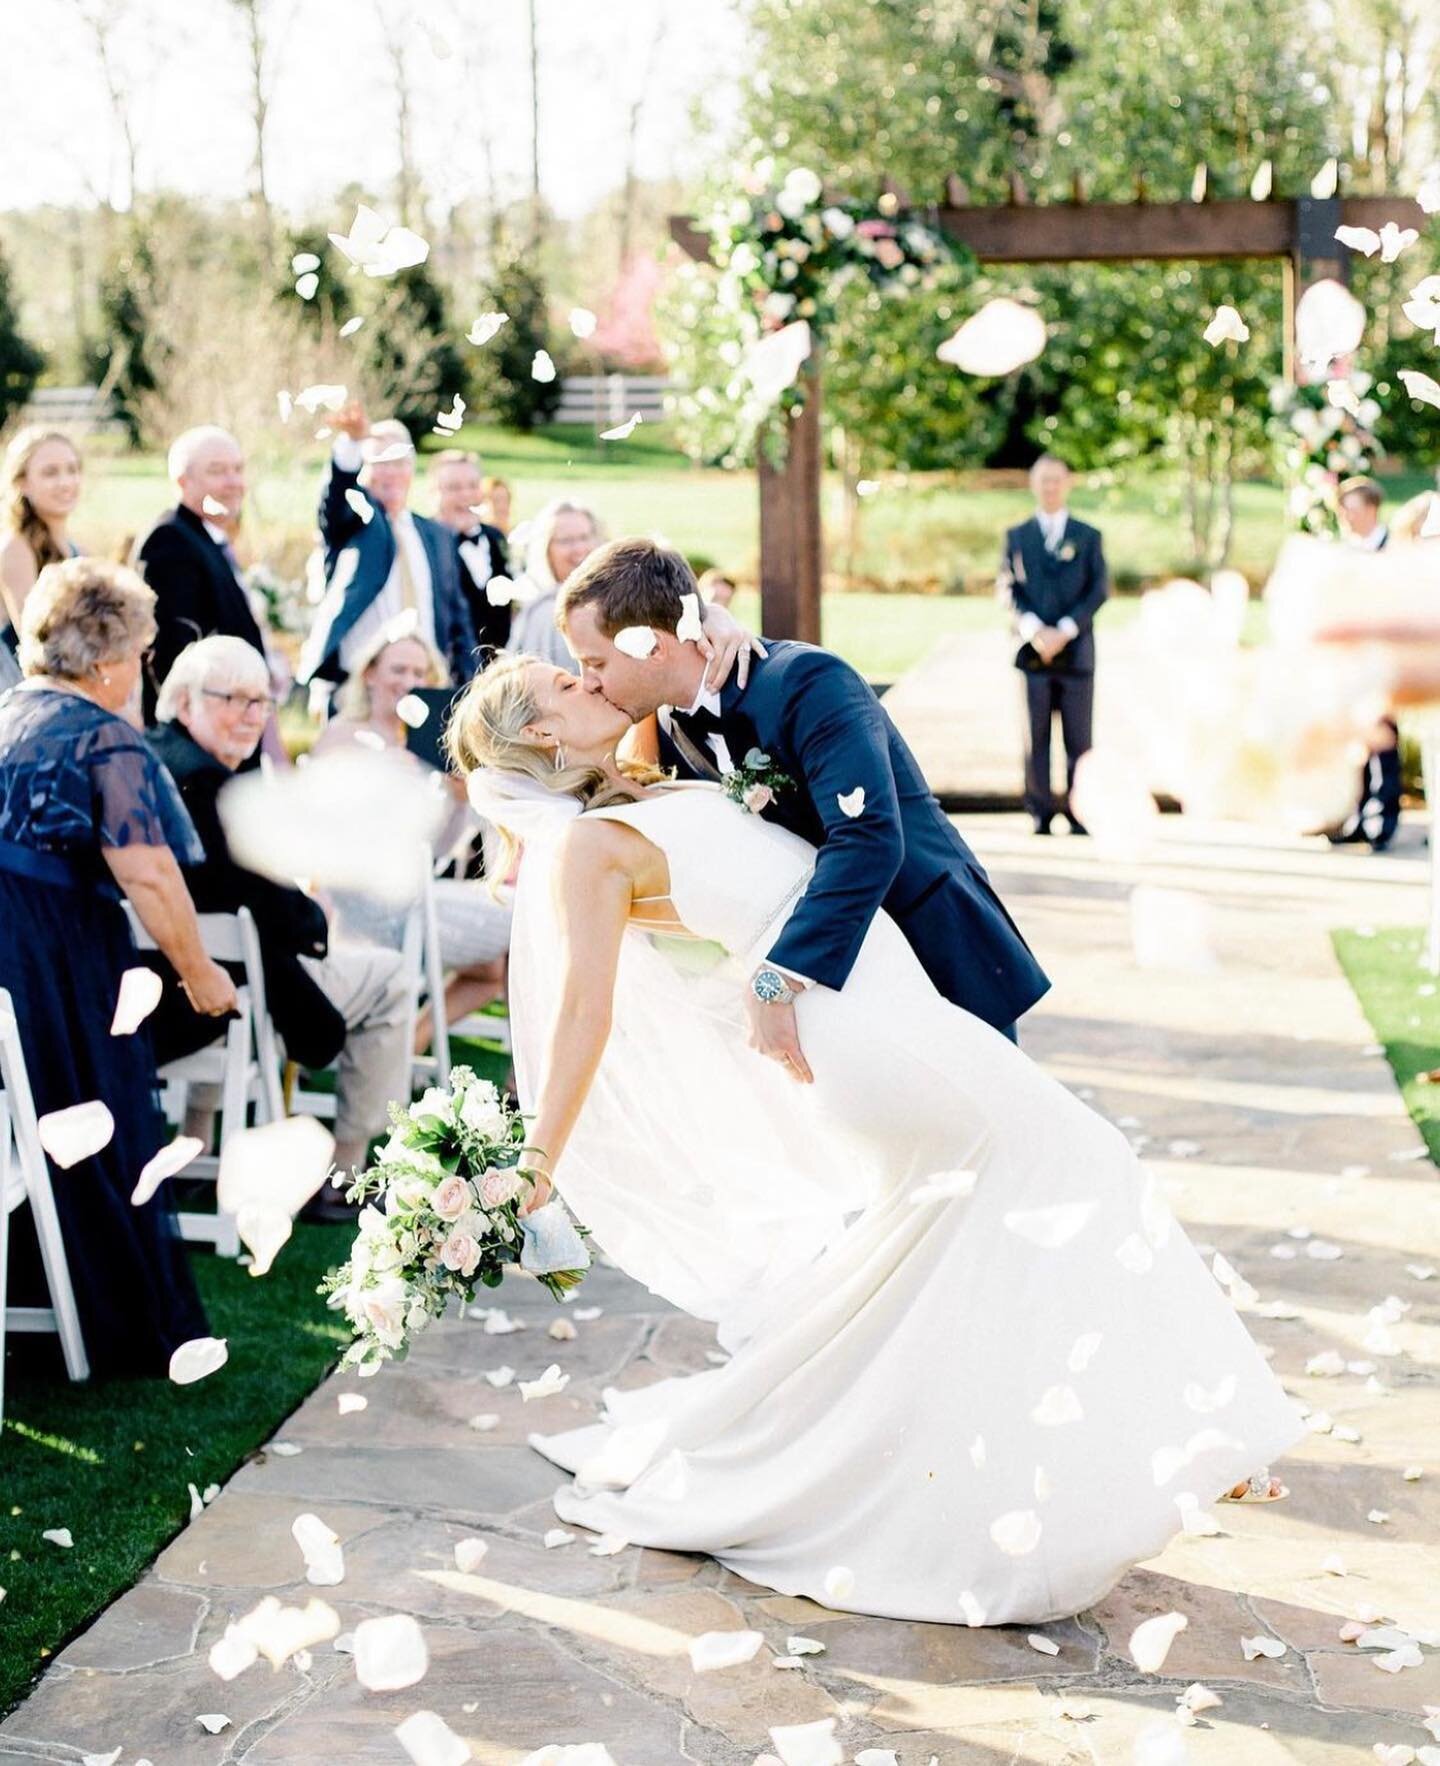 @katrinalangland captured these incredible shots of Morgan &amp; Scott  @hamiltonplacepursellfarms and that first shot just gives me chills! It&rsquo;s so beautiful! 

Morgan that gown looks like it was absolutely made for you 🤍

#EJAssociates
#EJAs